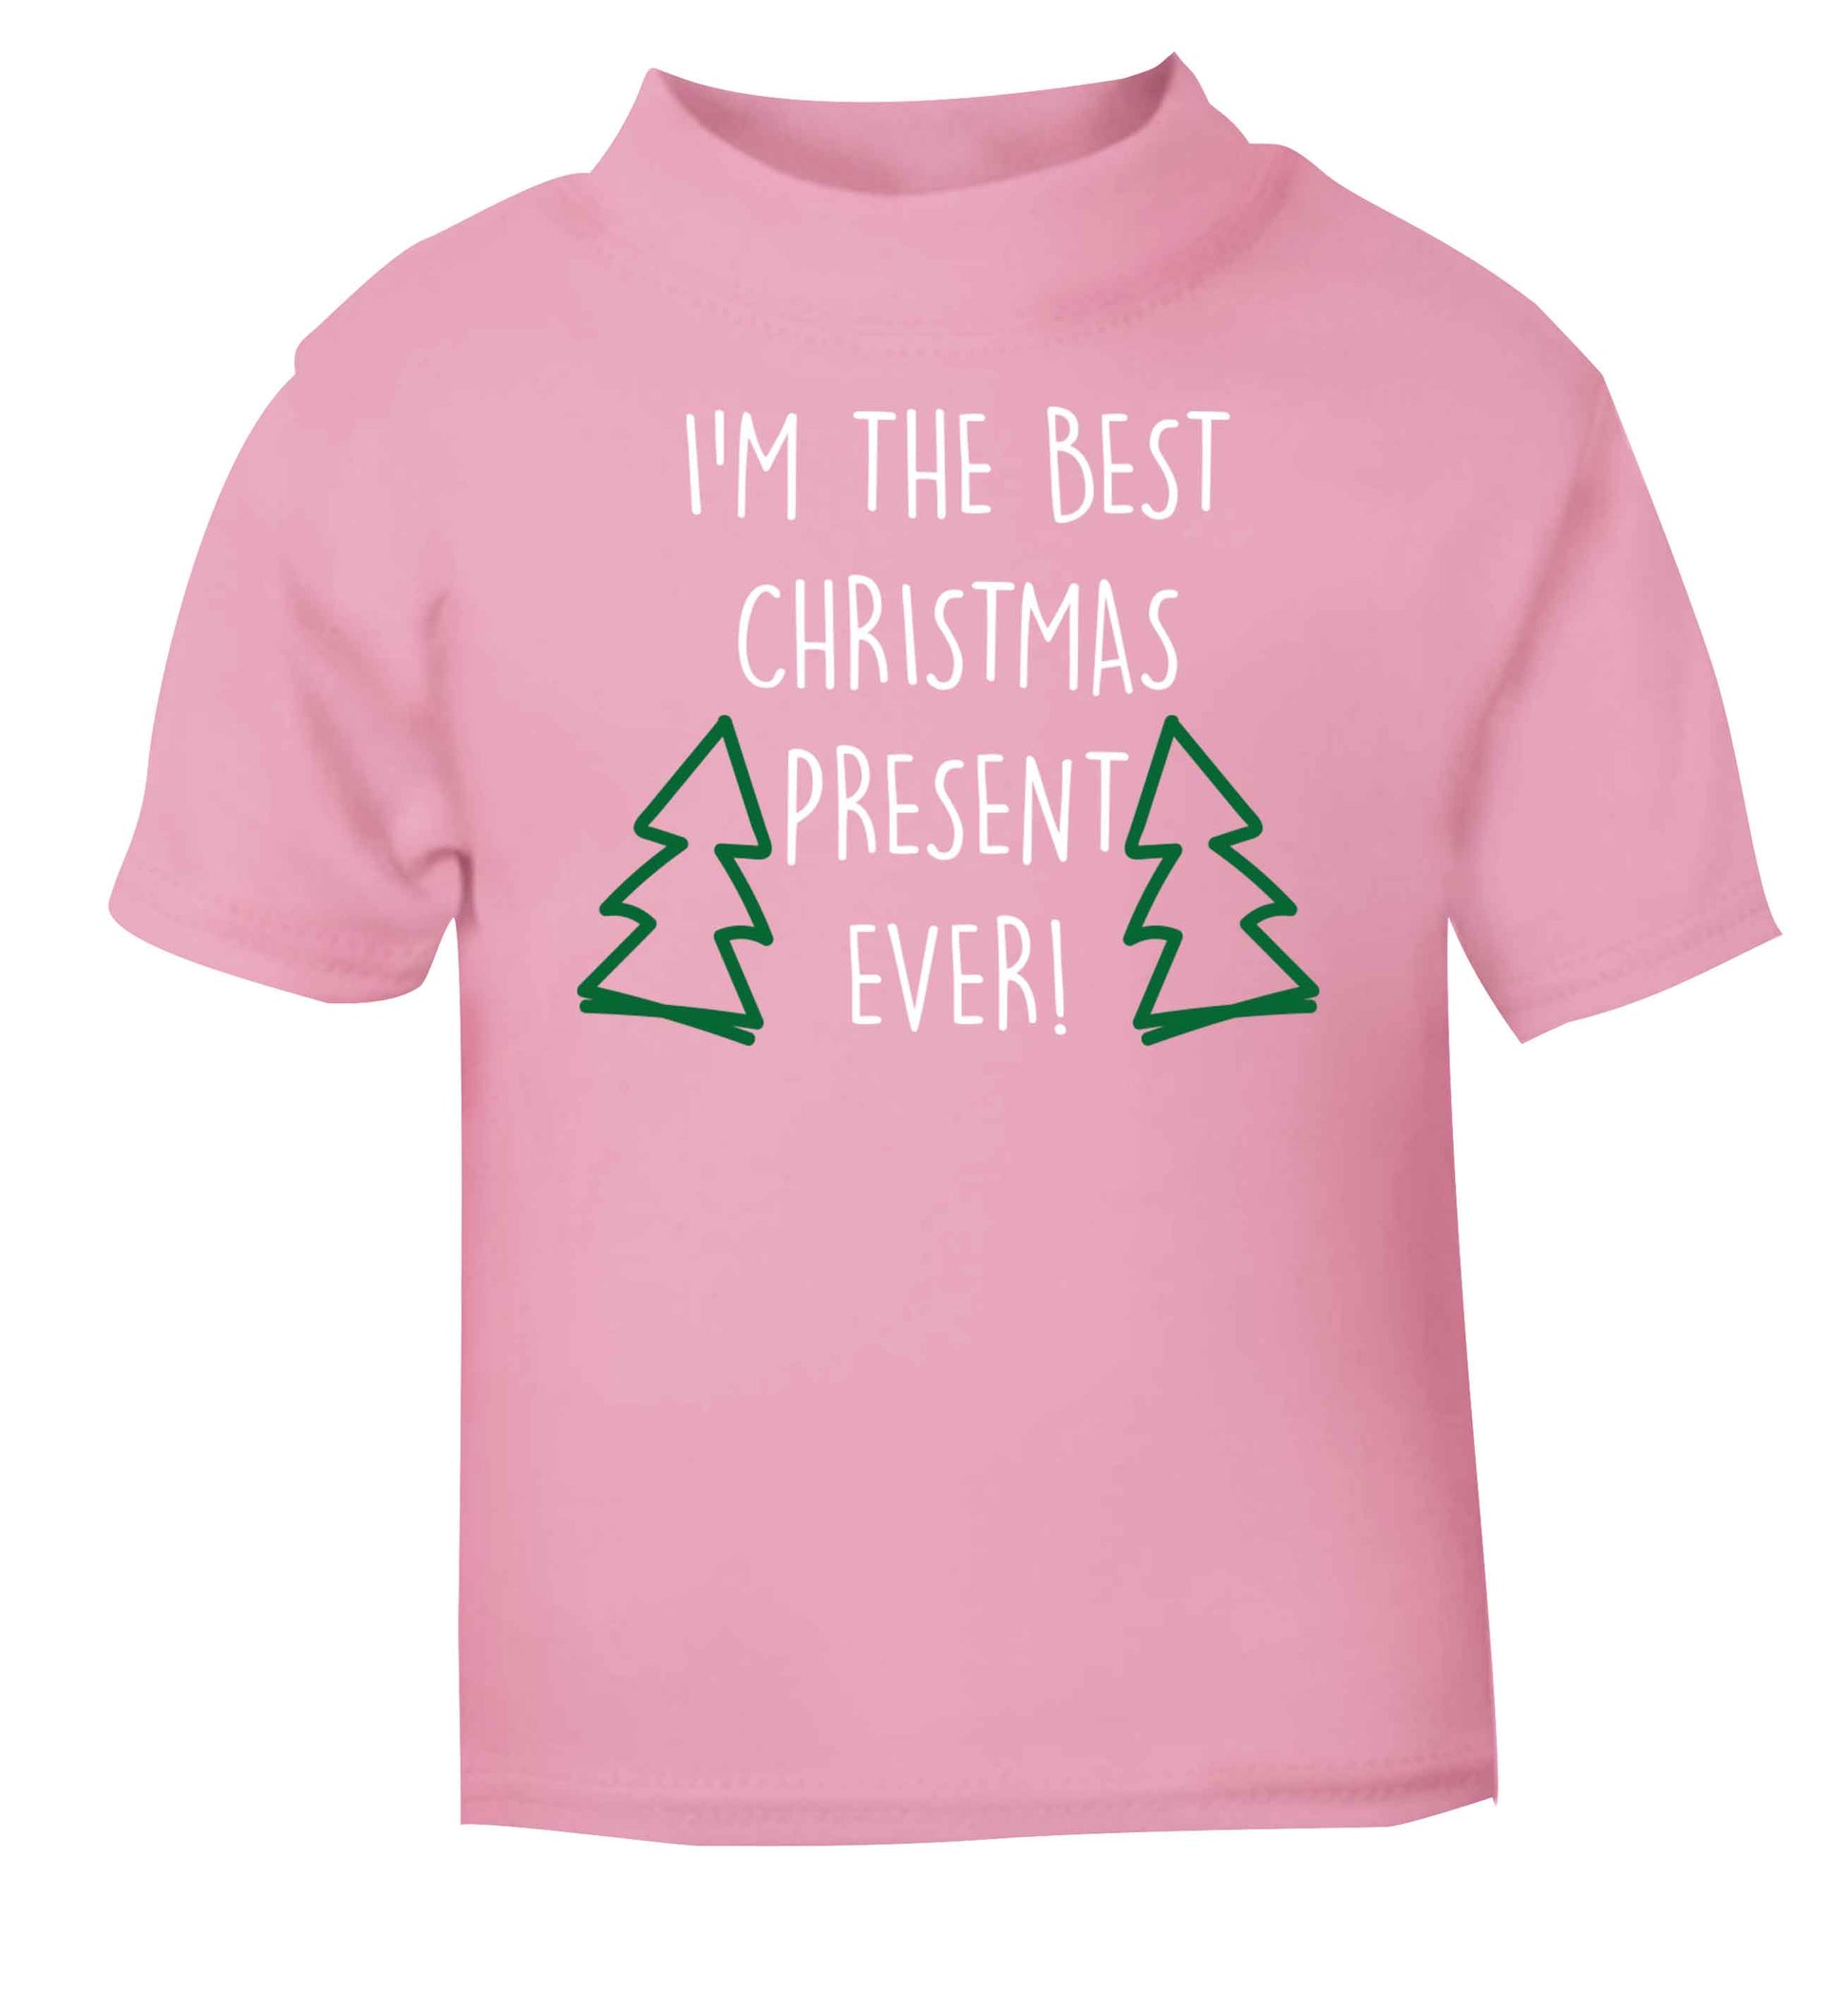 I'm the best Christmas present ever light pink baby toddler Tshirt 2 Years